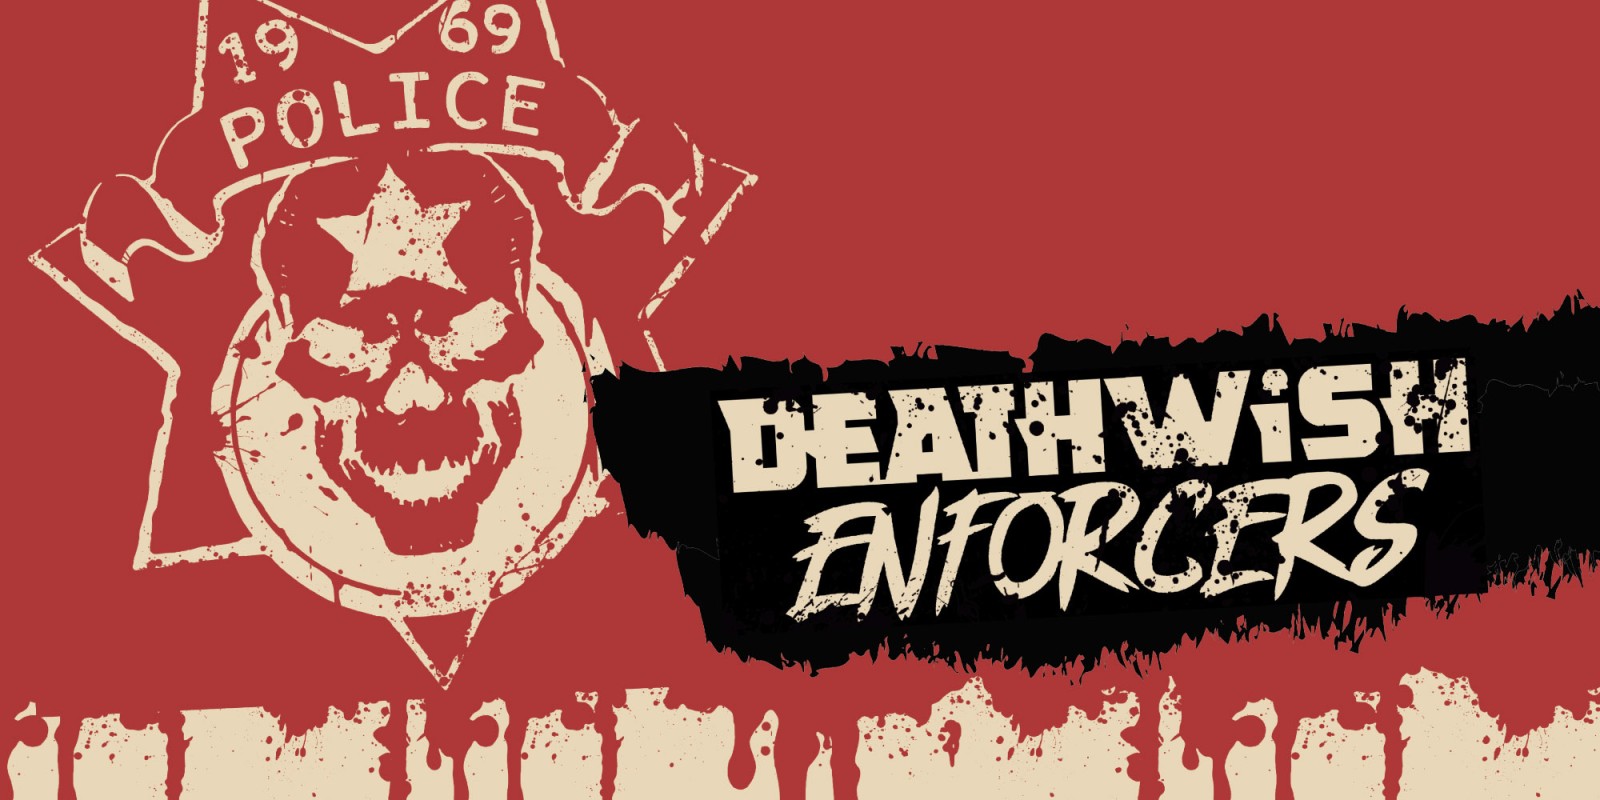 [request] Deathwish enforces - FearLess Cheat Engine